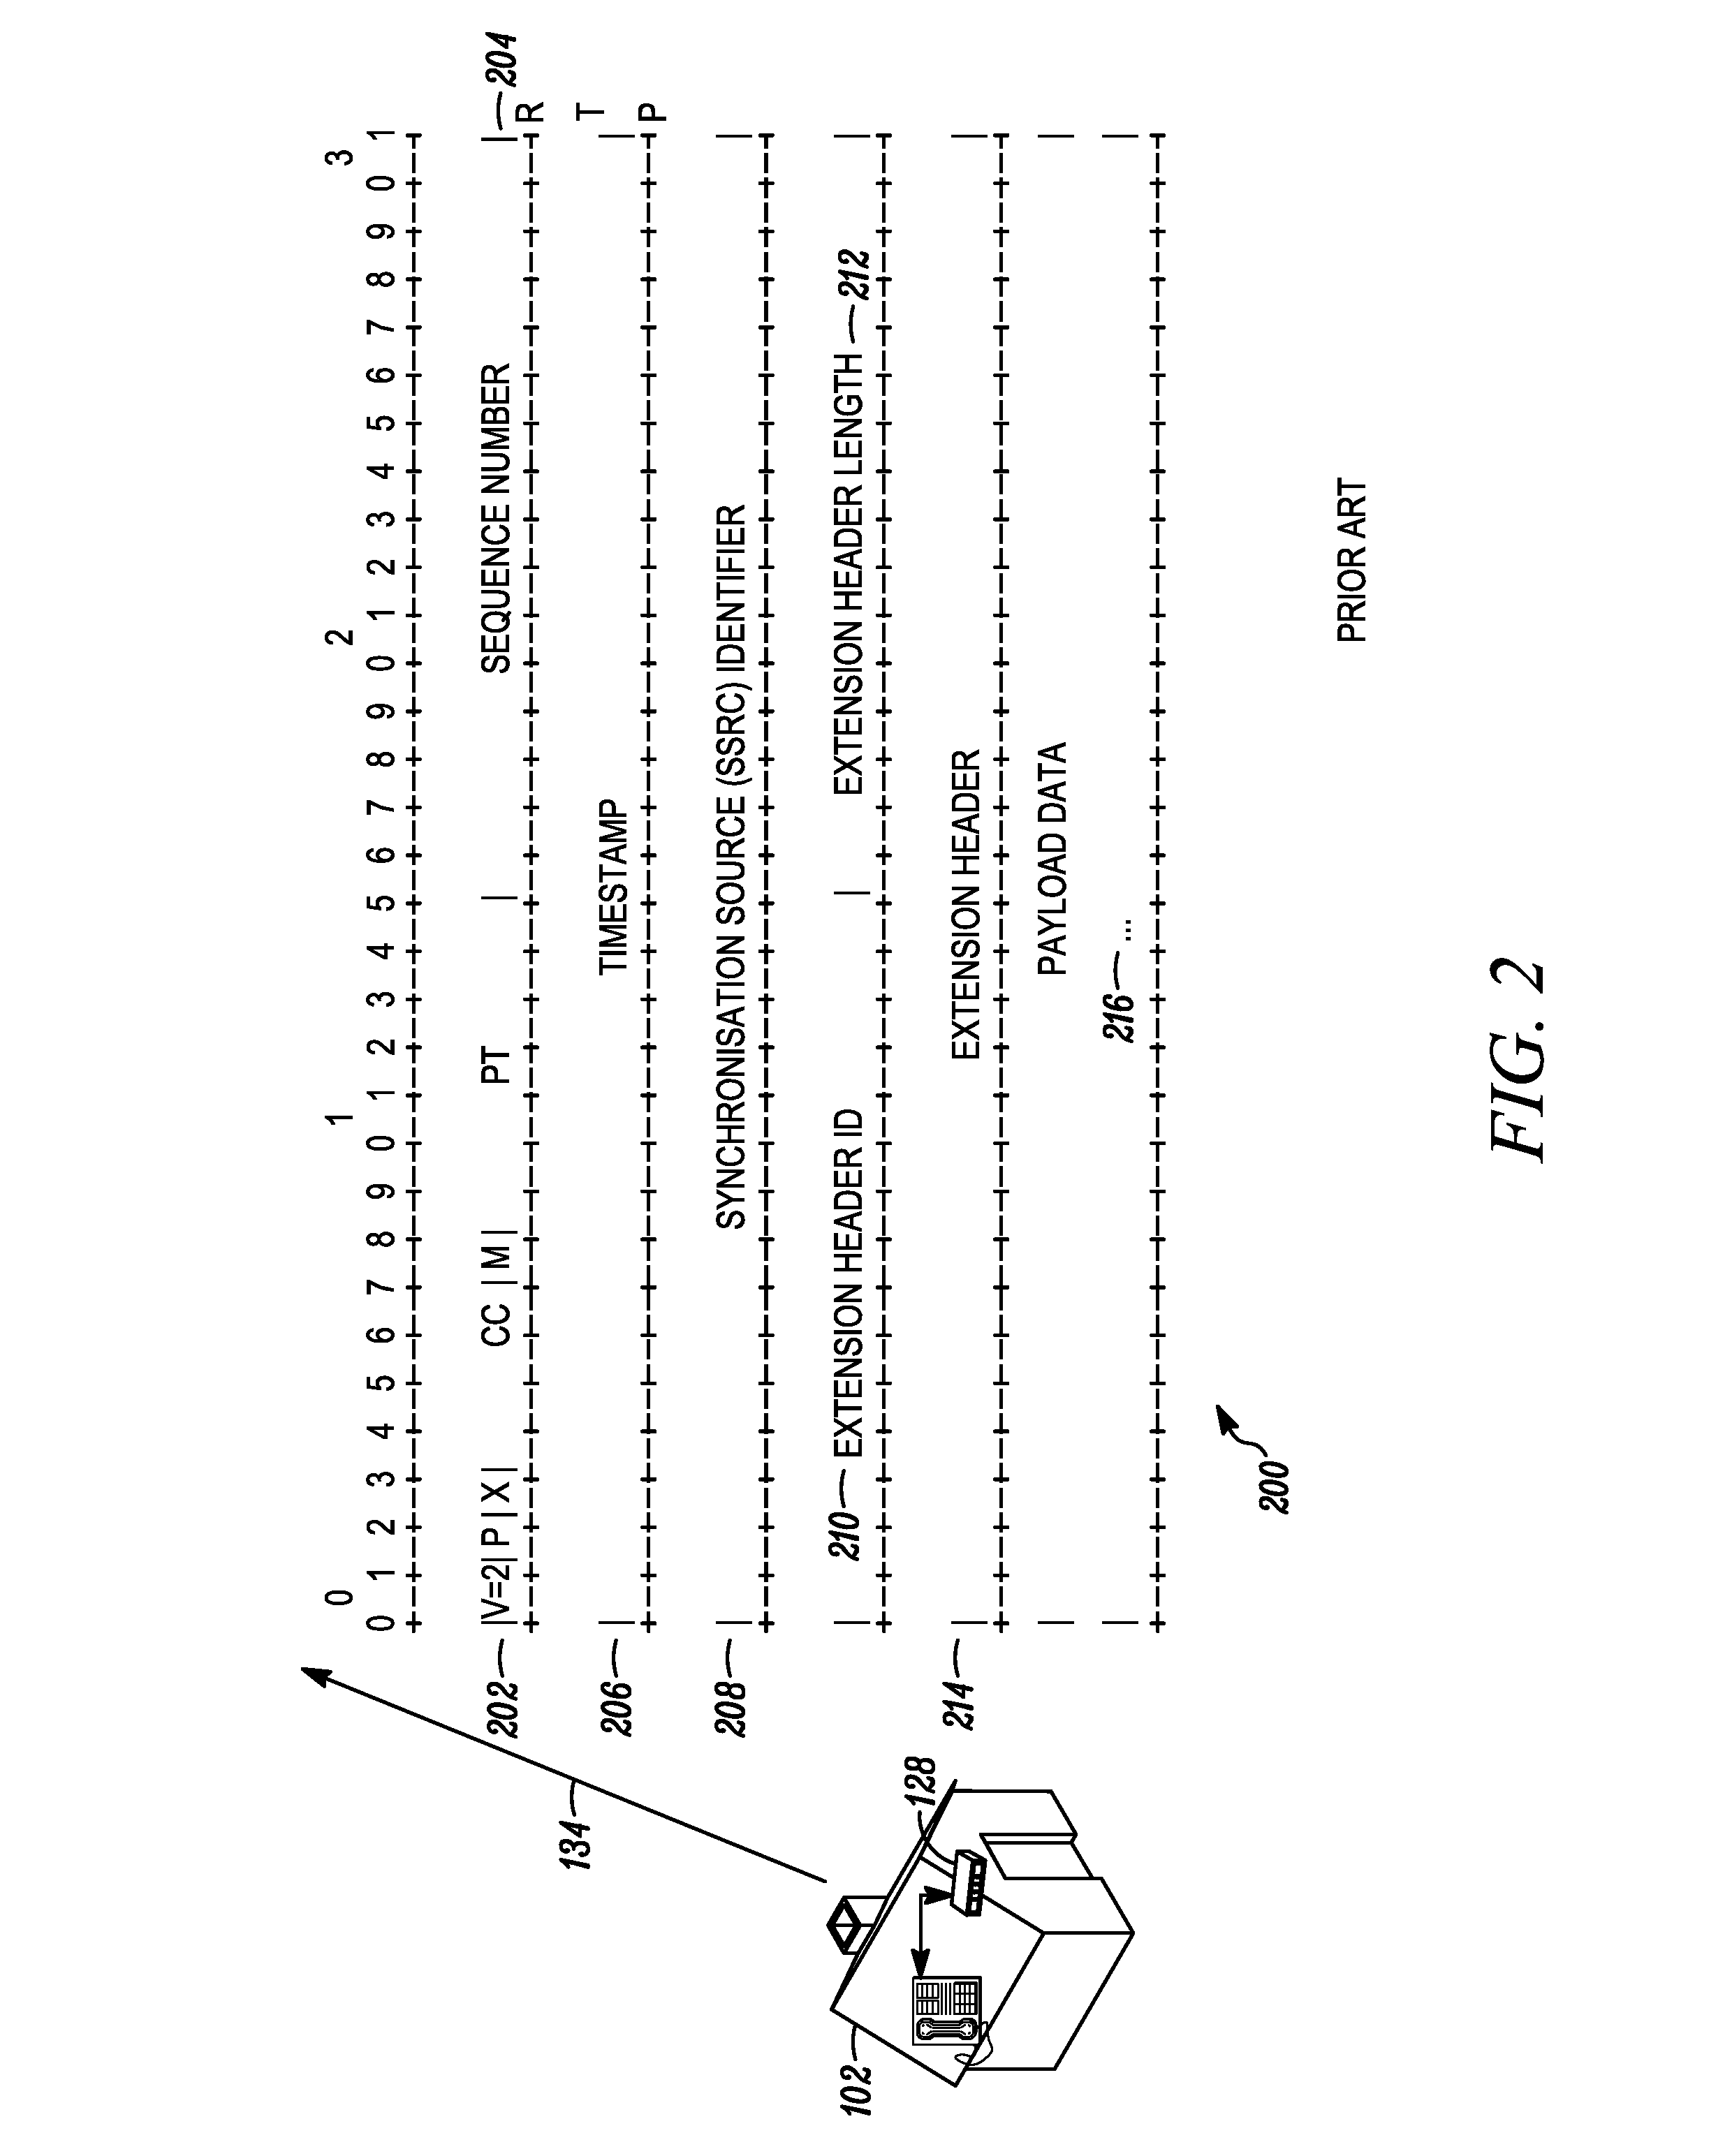 System and method for latency measurement at each network element participating as an rtp relay in a telecommunication network